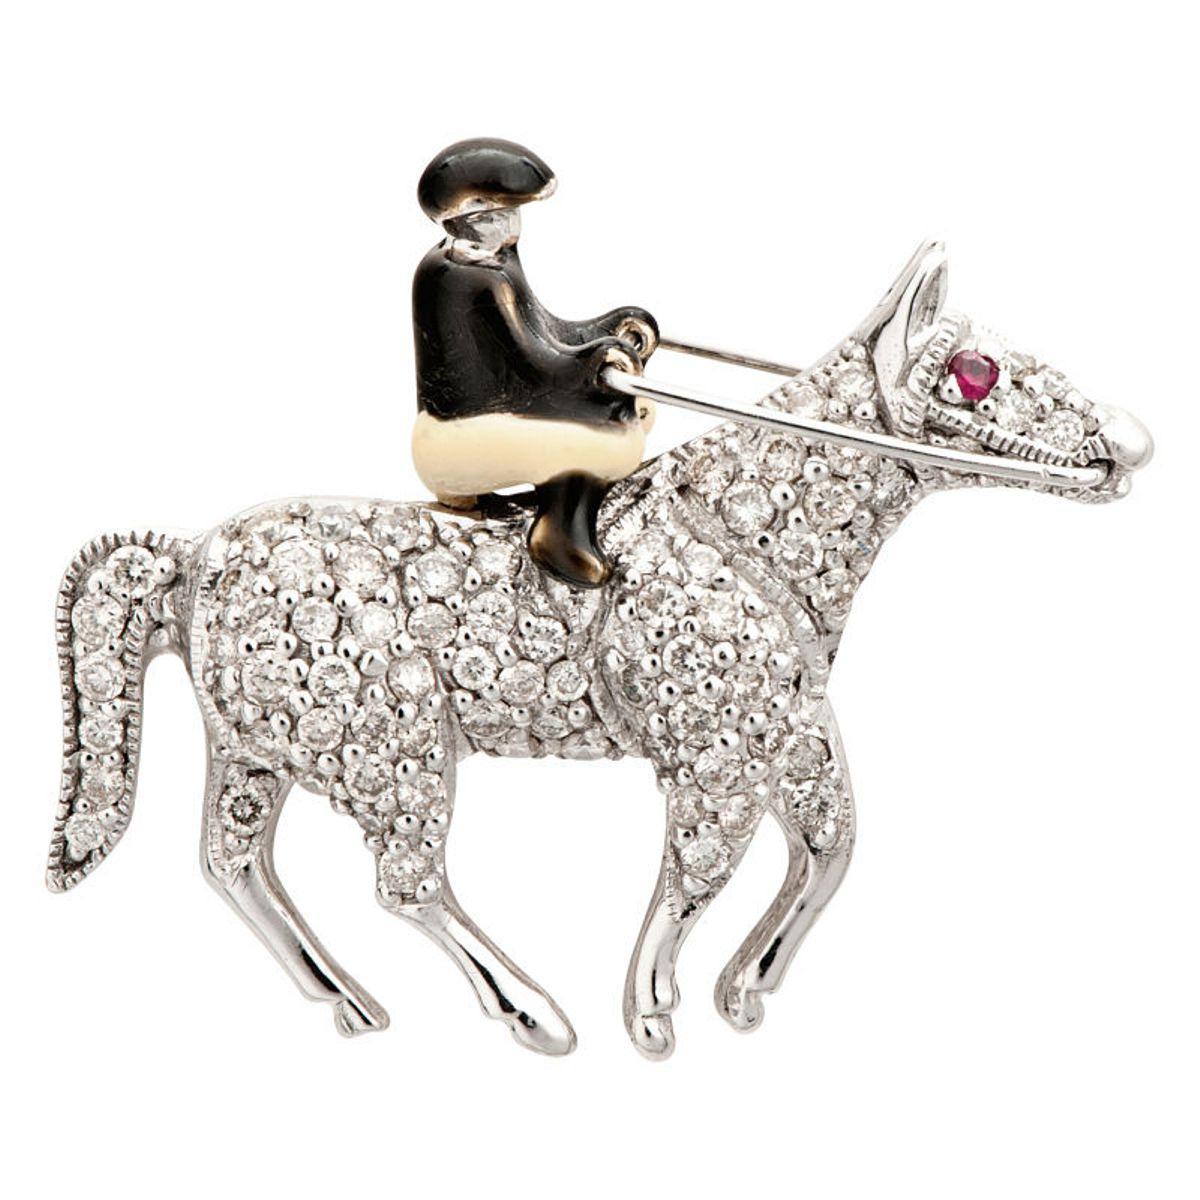 18 Carat White Gold Diamond Brooch in the Form of a Rider on Horseback In Excellent Condition For Sale In Berlin, DE